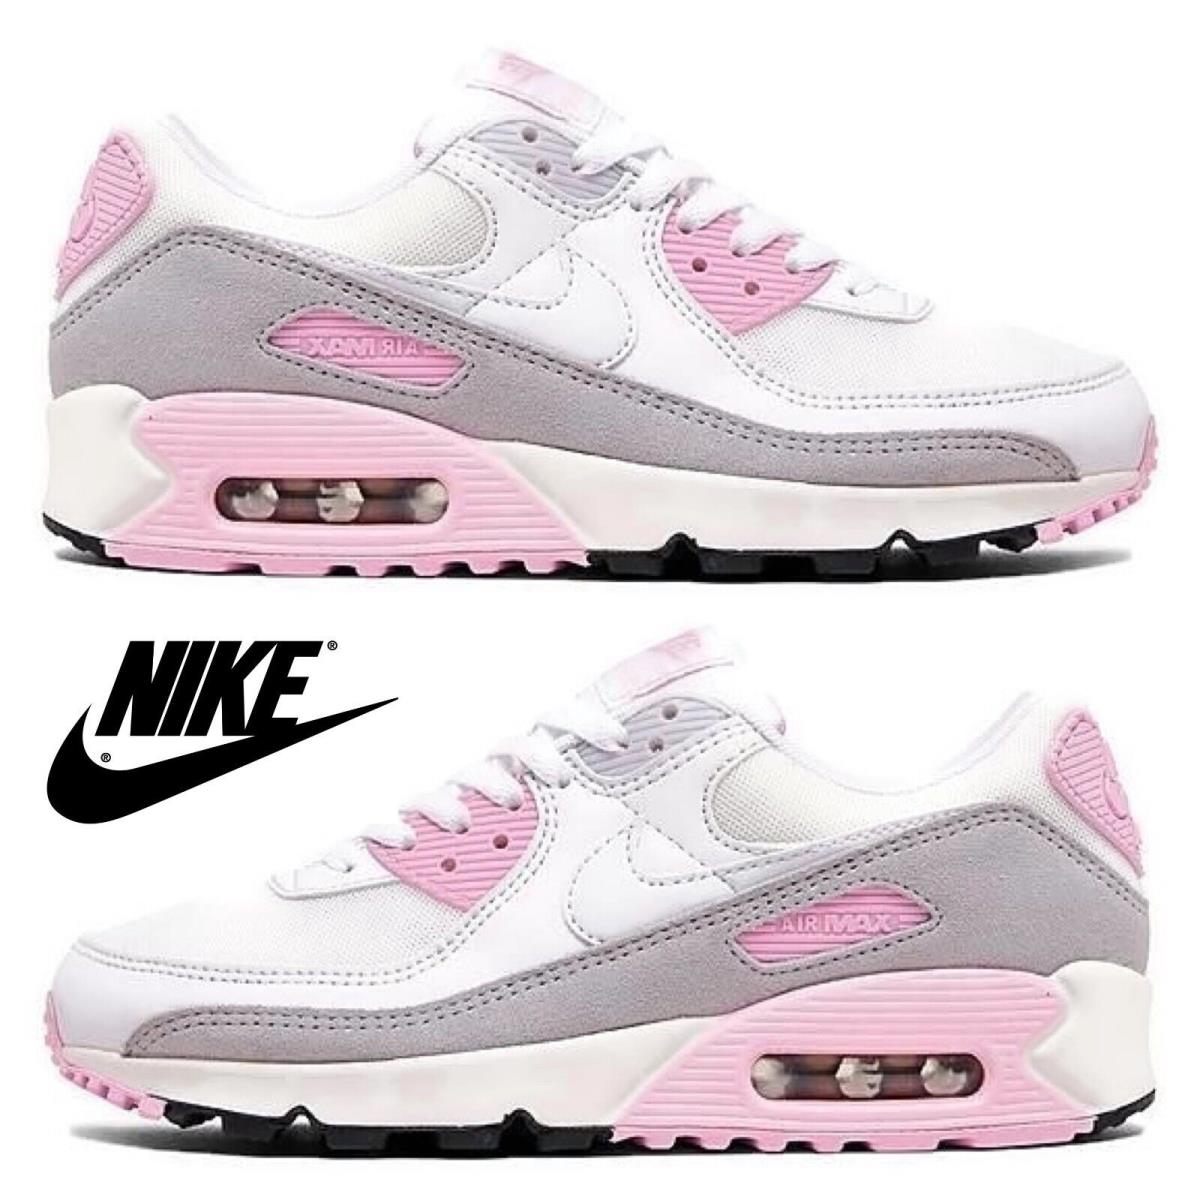 Nike Air Max 90 Women s Sneakers Casual Shoes Premium Running Sport White Pink